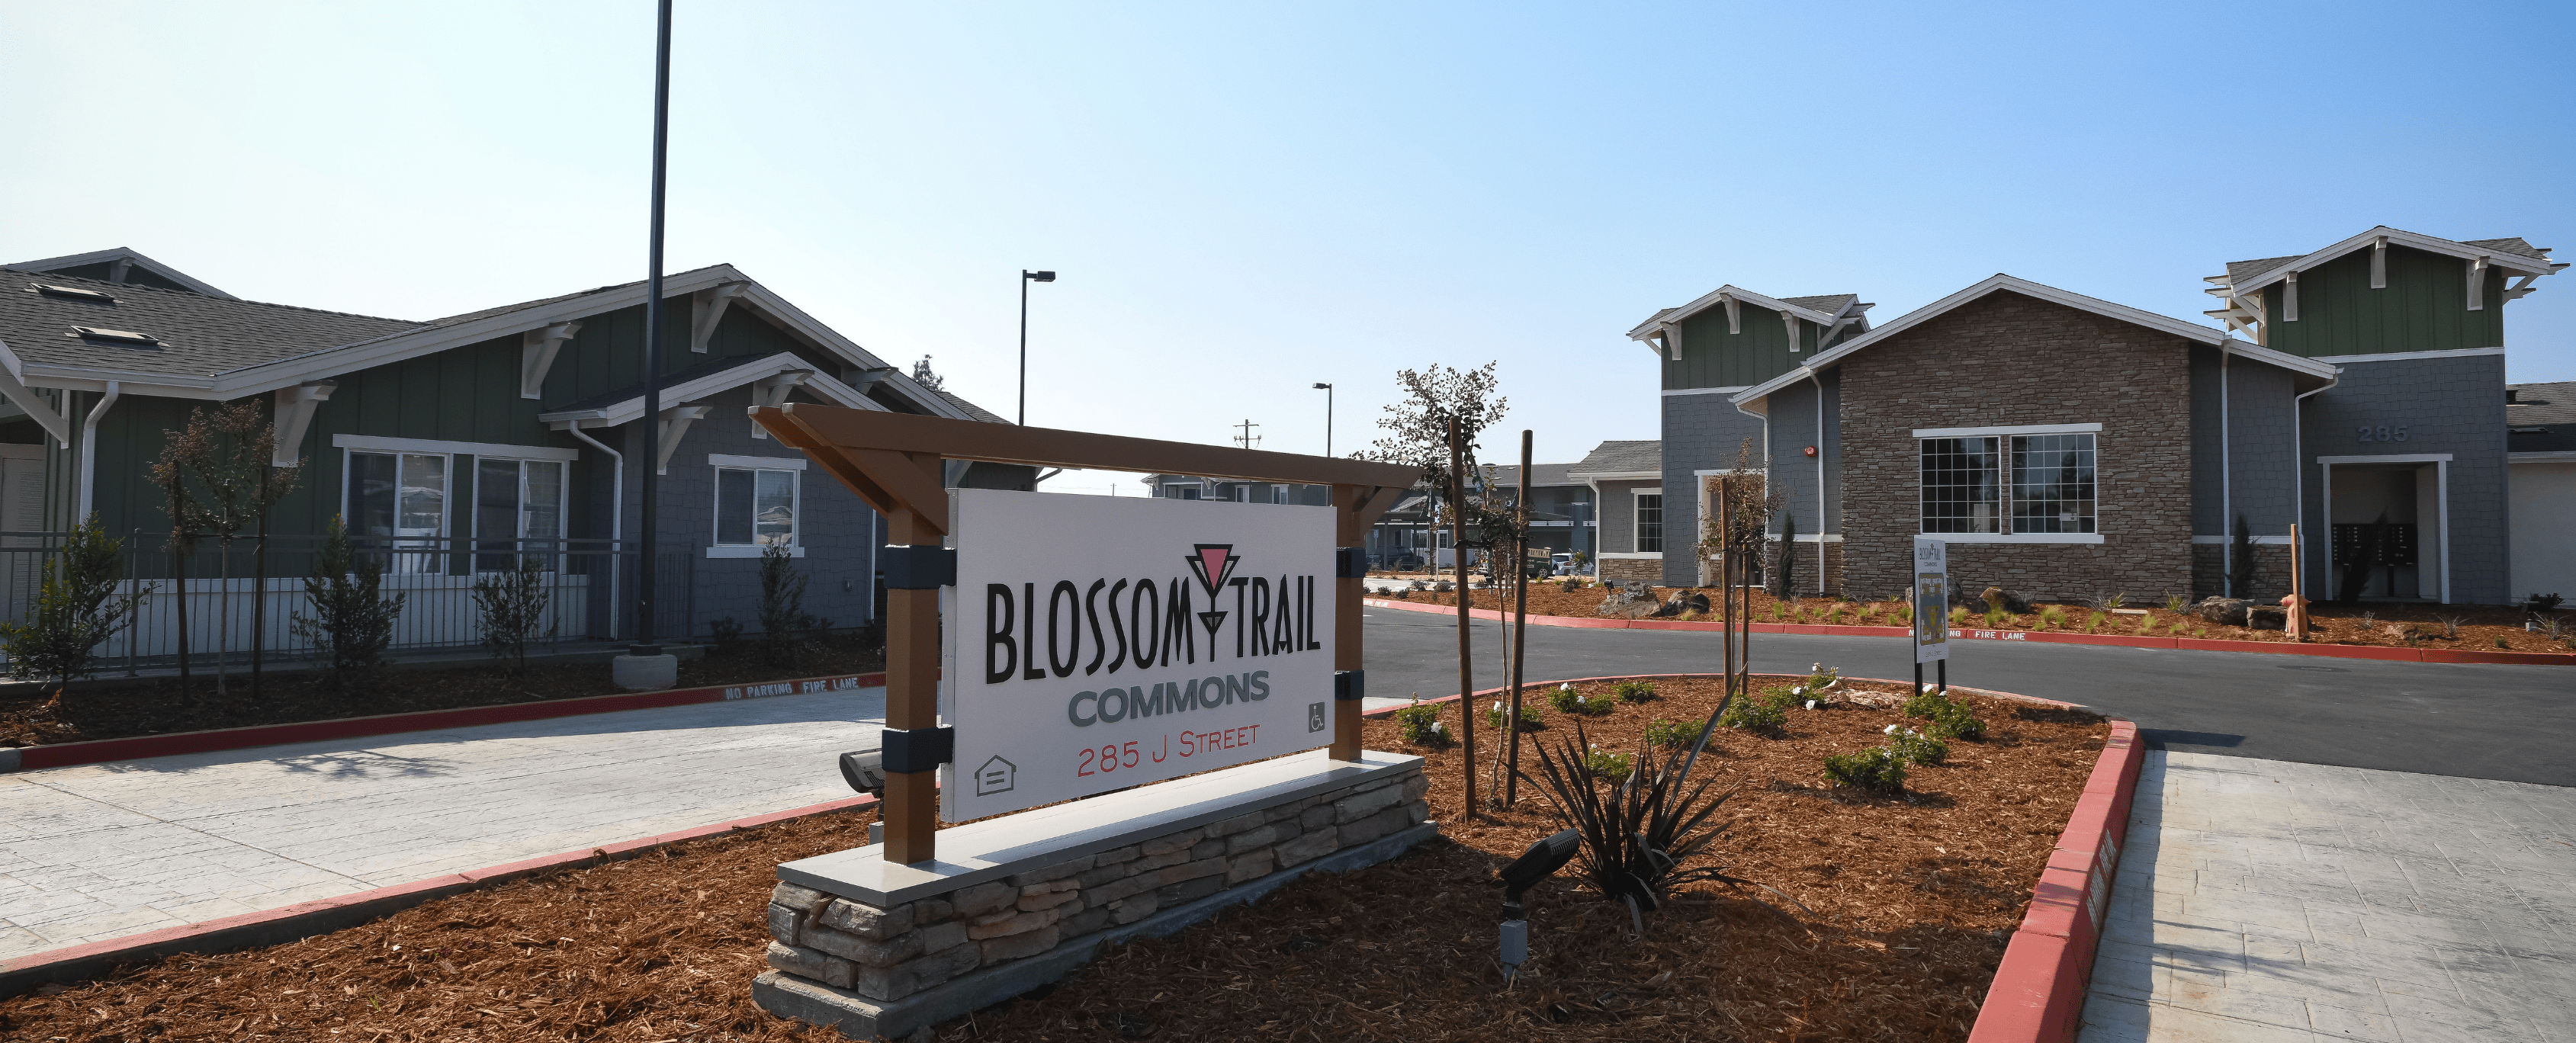 Blossom Trail Commons